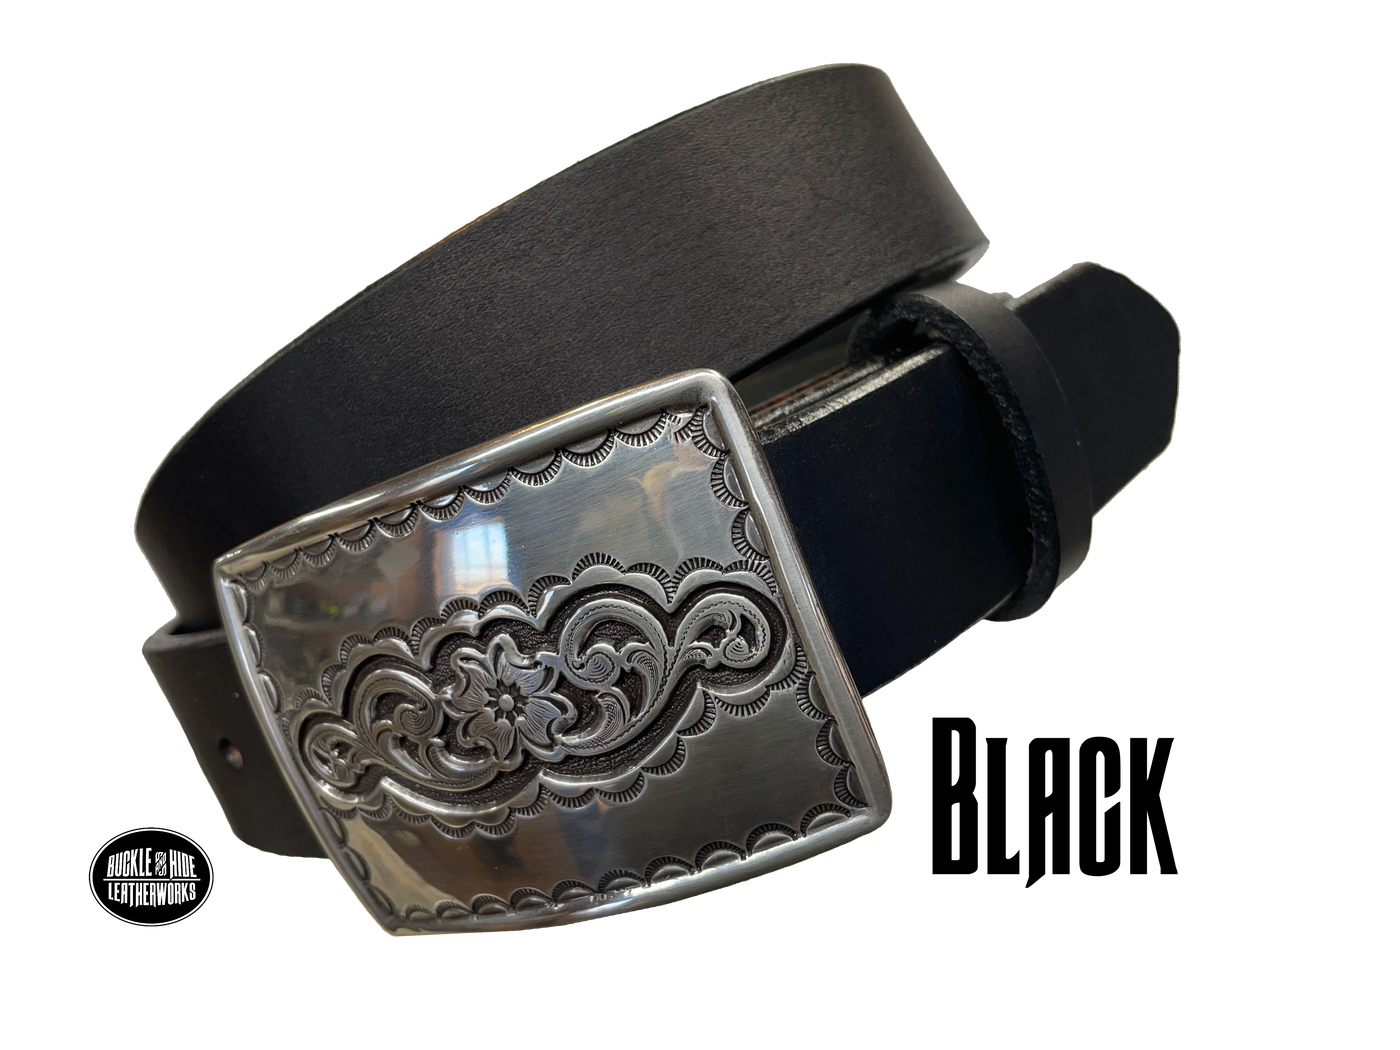 Rectangular antique silver belt buckle with western style tooling, size approx. 3" wide by 2 1/2" tall. Belt is handmade from a single strip of leather in our shop. Belt colors available are distressed brown, black, and dark brown. Buckle snaps in place for easy changing if desired.﻿ CHOOSE ONE BELT STRIP COLOR! Available online and at our shop just outside Nashville in Smyrna, TN. Black belt.